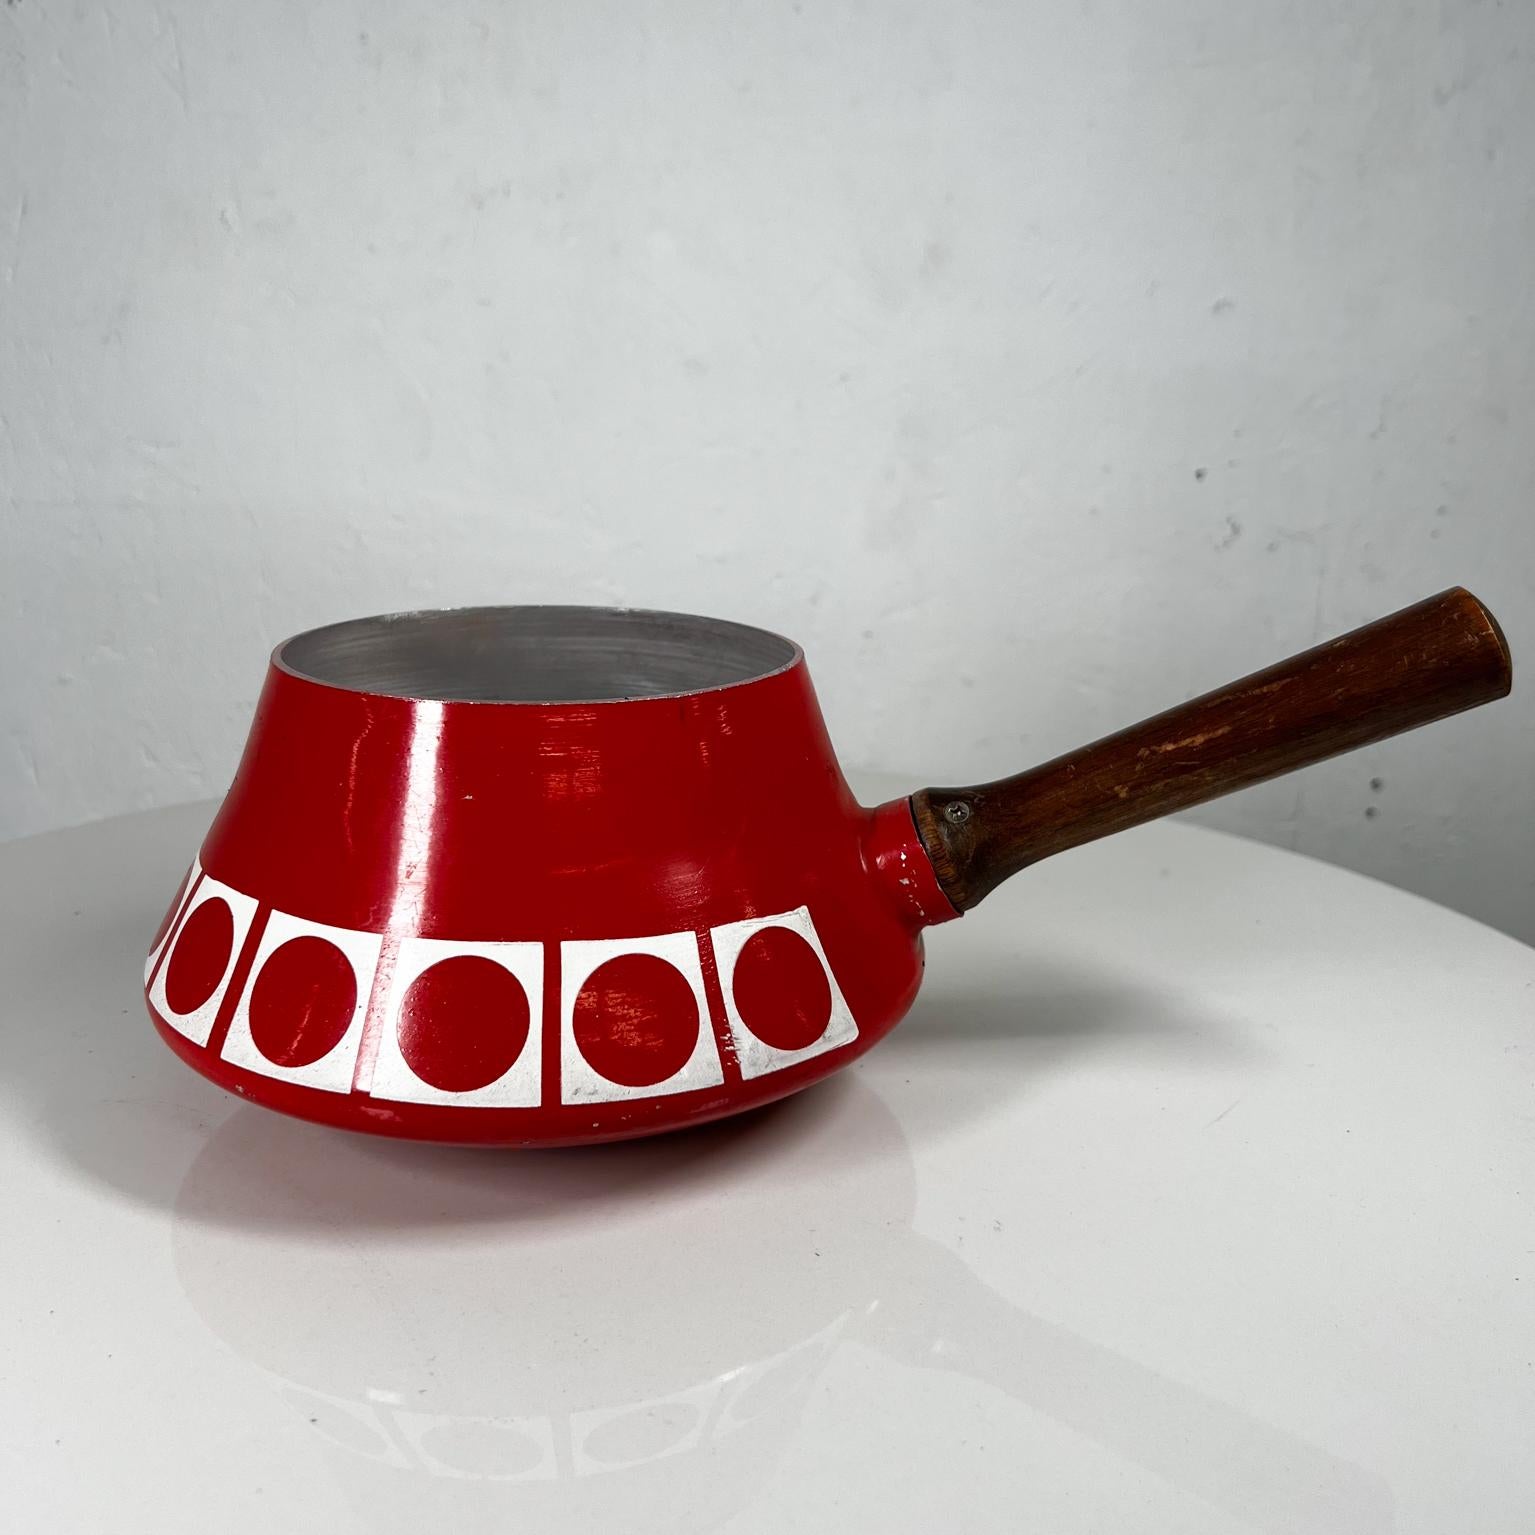 Mid-20th Century 1960s Modern Atomic Red Fondue Sauce Pot by Imperial Inter Japan